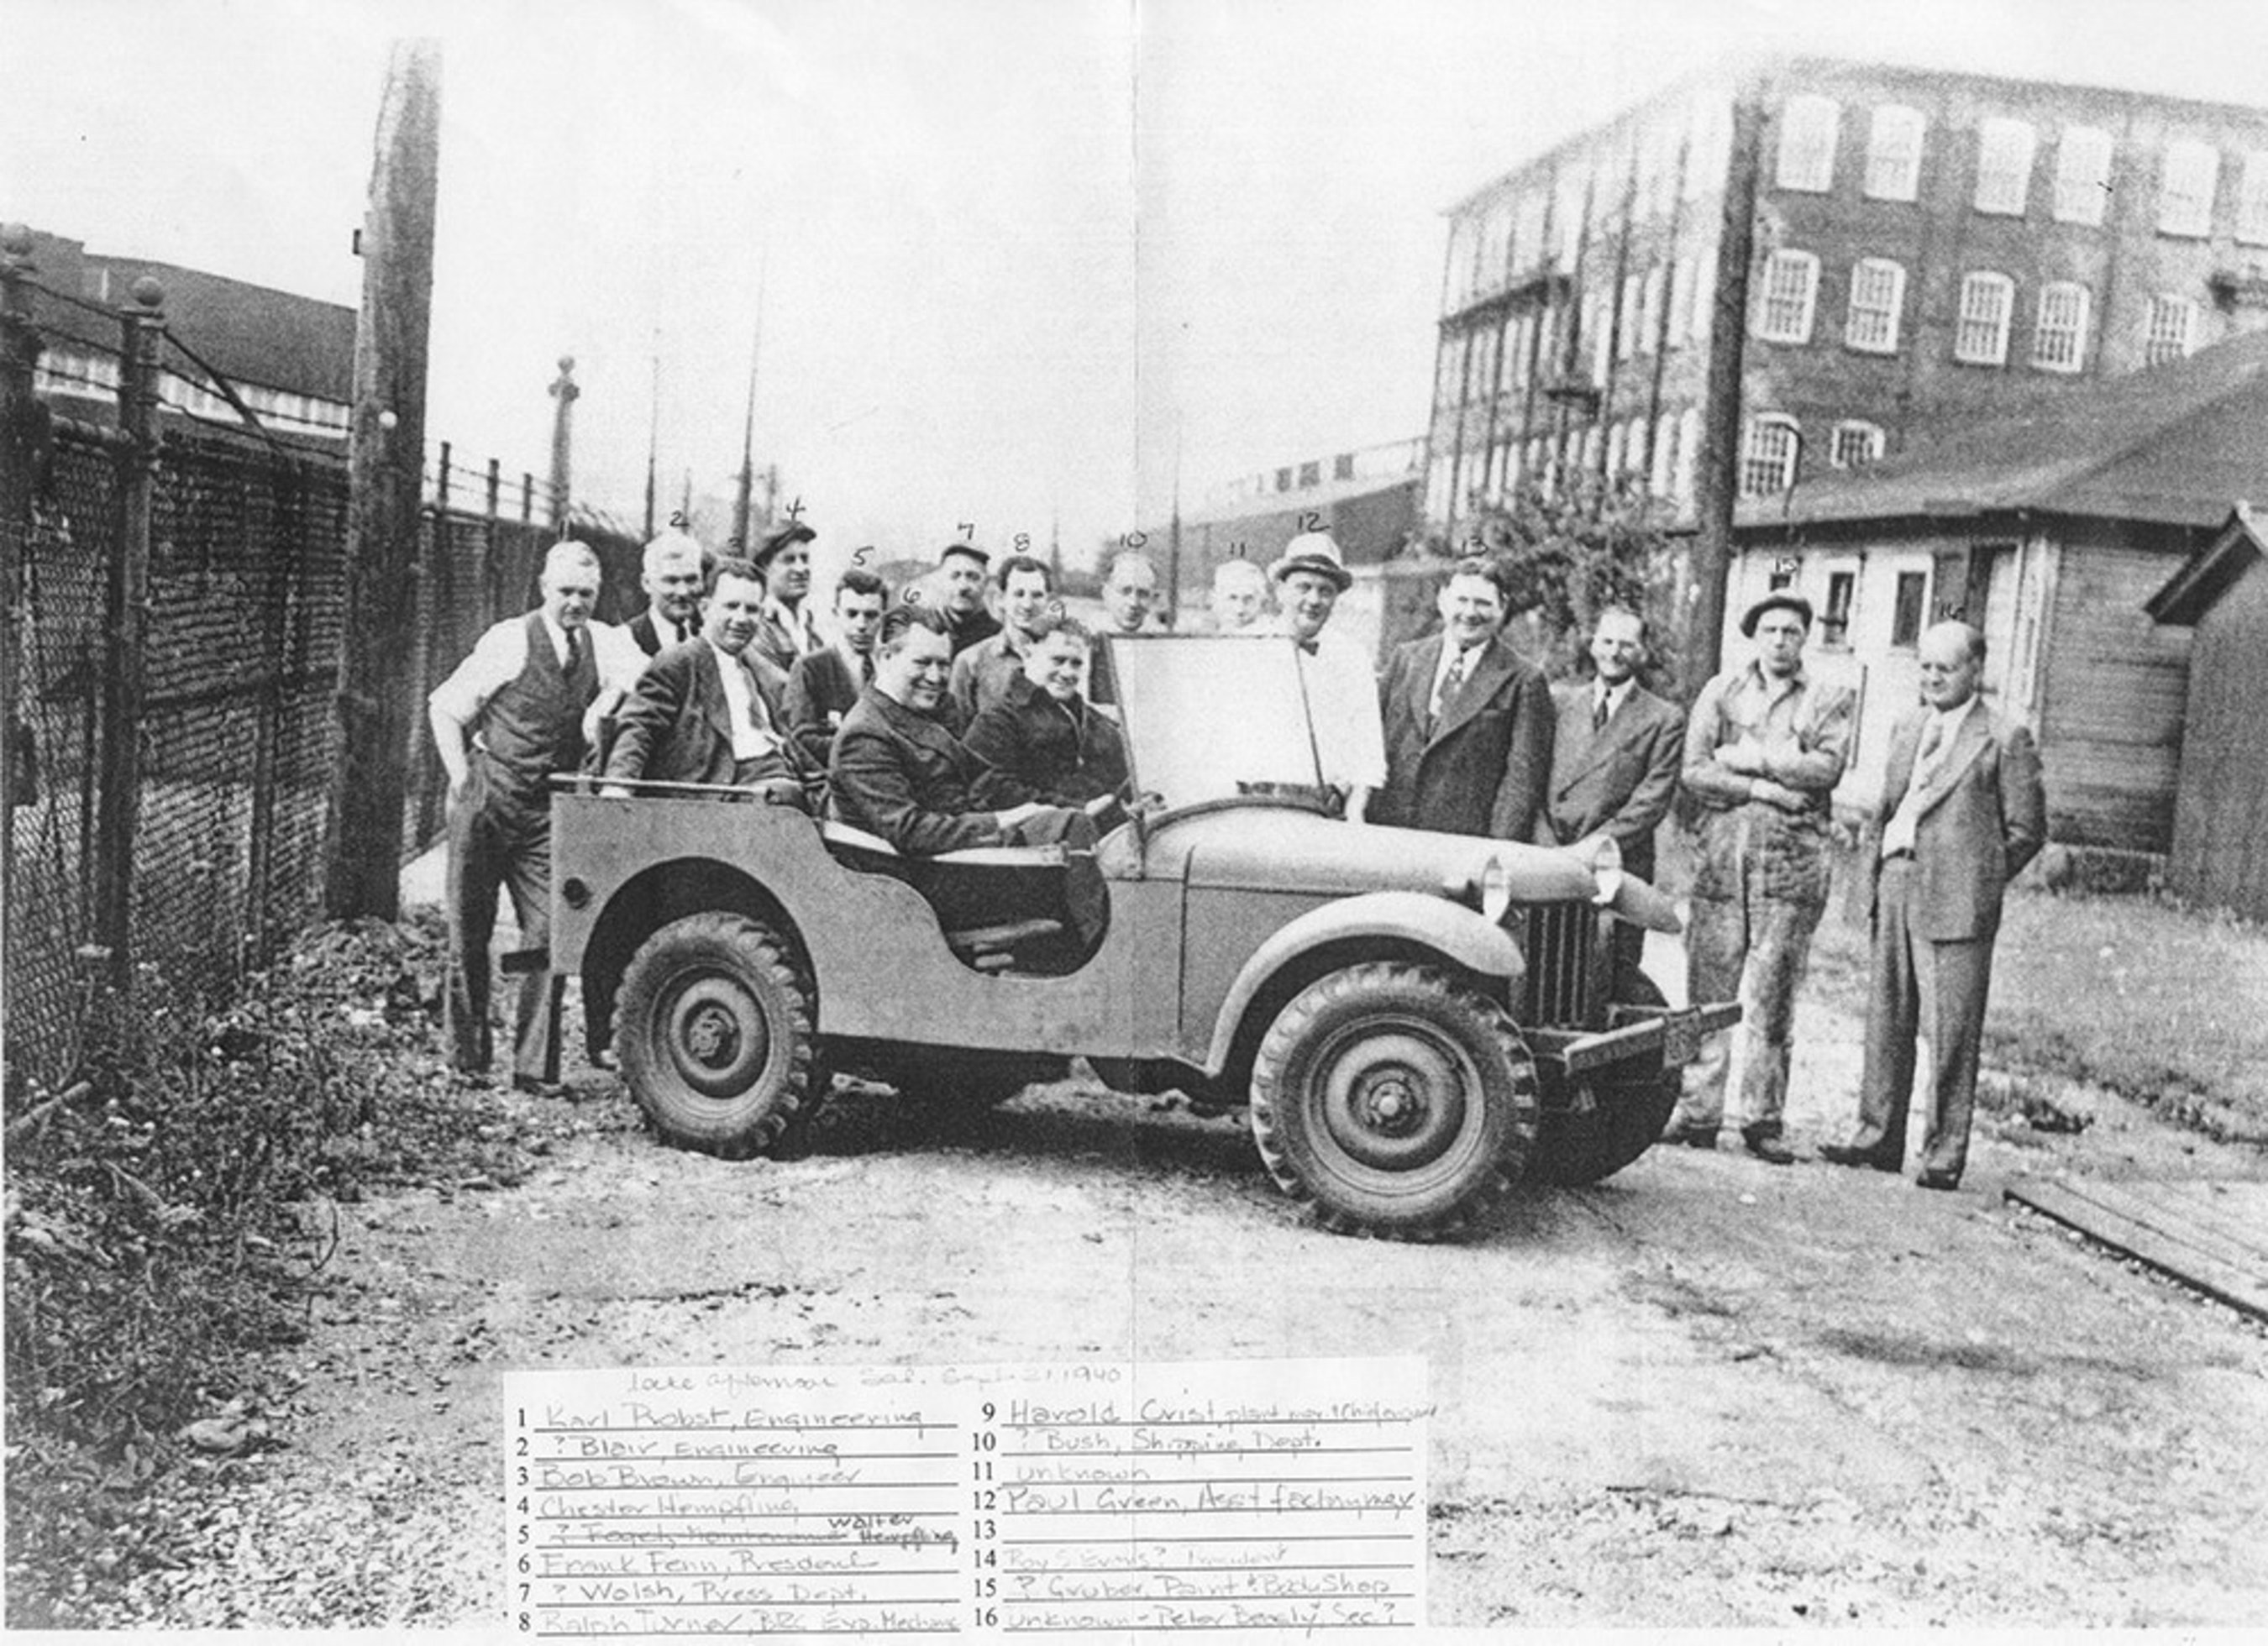 Bantam design team posing with their prototype BRC 60 “Number 1” scout car before submitting it to the Army for consideration, Butler, Pennsylvania, United States, 21 Sep 1940.